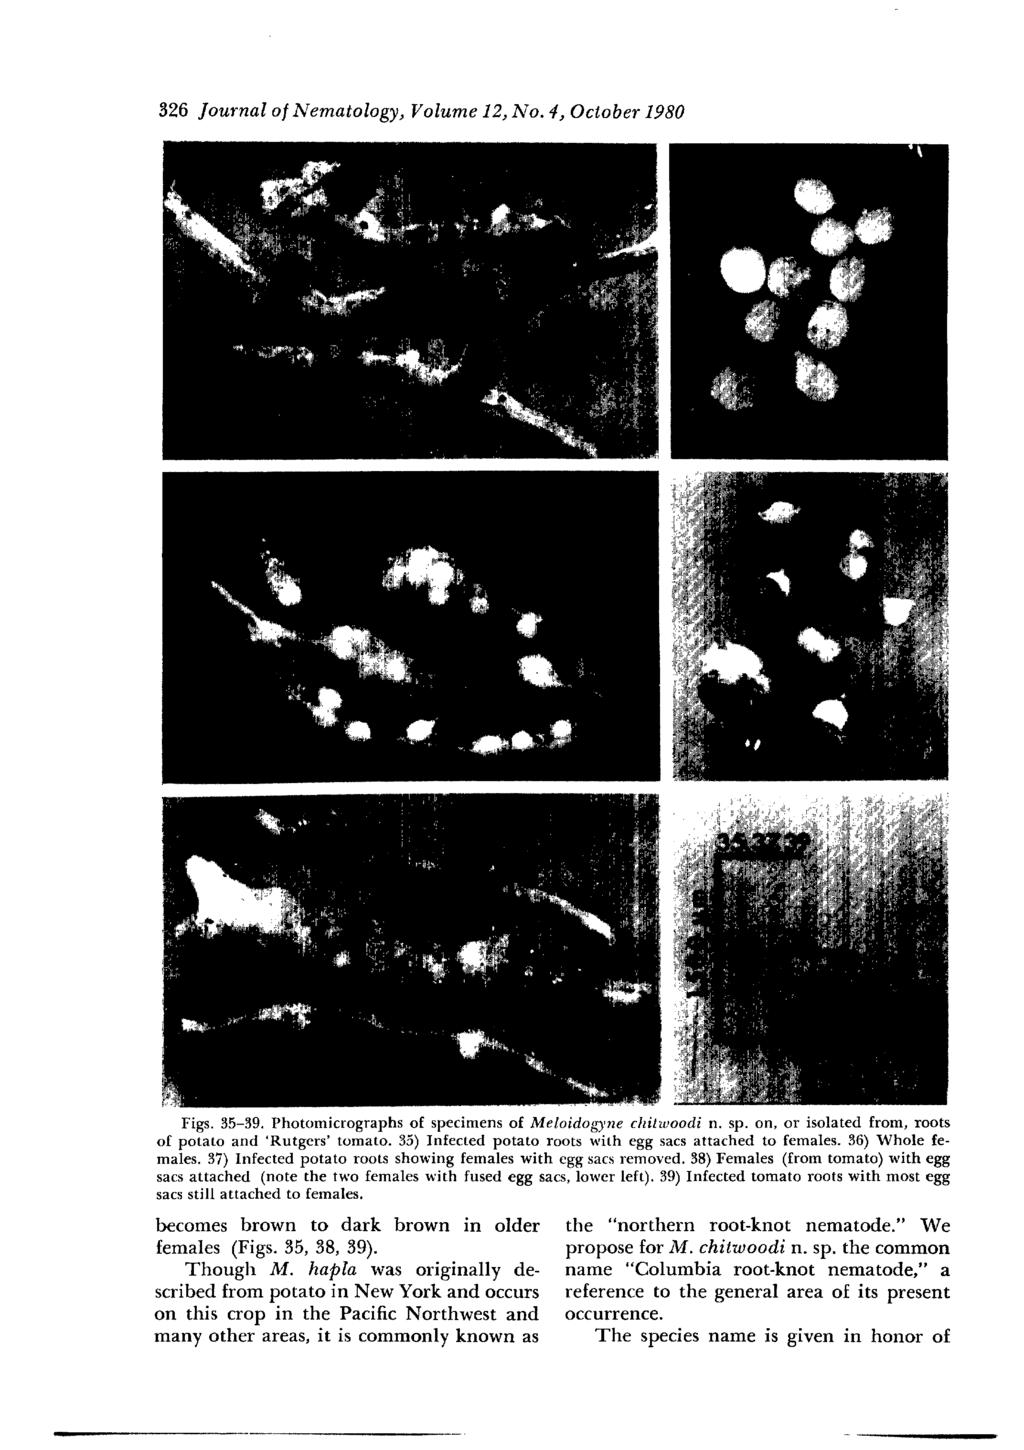 326 Journal o] Nematology, Volume 12, No. 4, October 1980 Figs. 35-39. Photomicrographs of specimens of Meloidogyne chitwoodi n. sp. on, or isolated from, roots of potato and 'Rutgers' tomato.